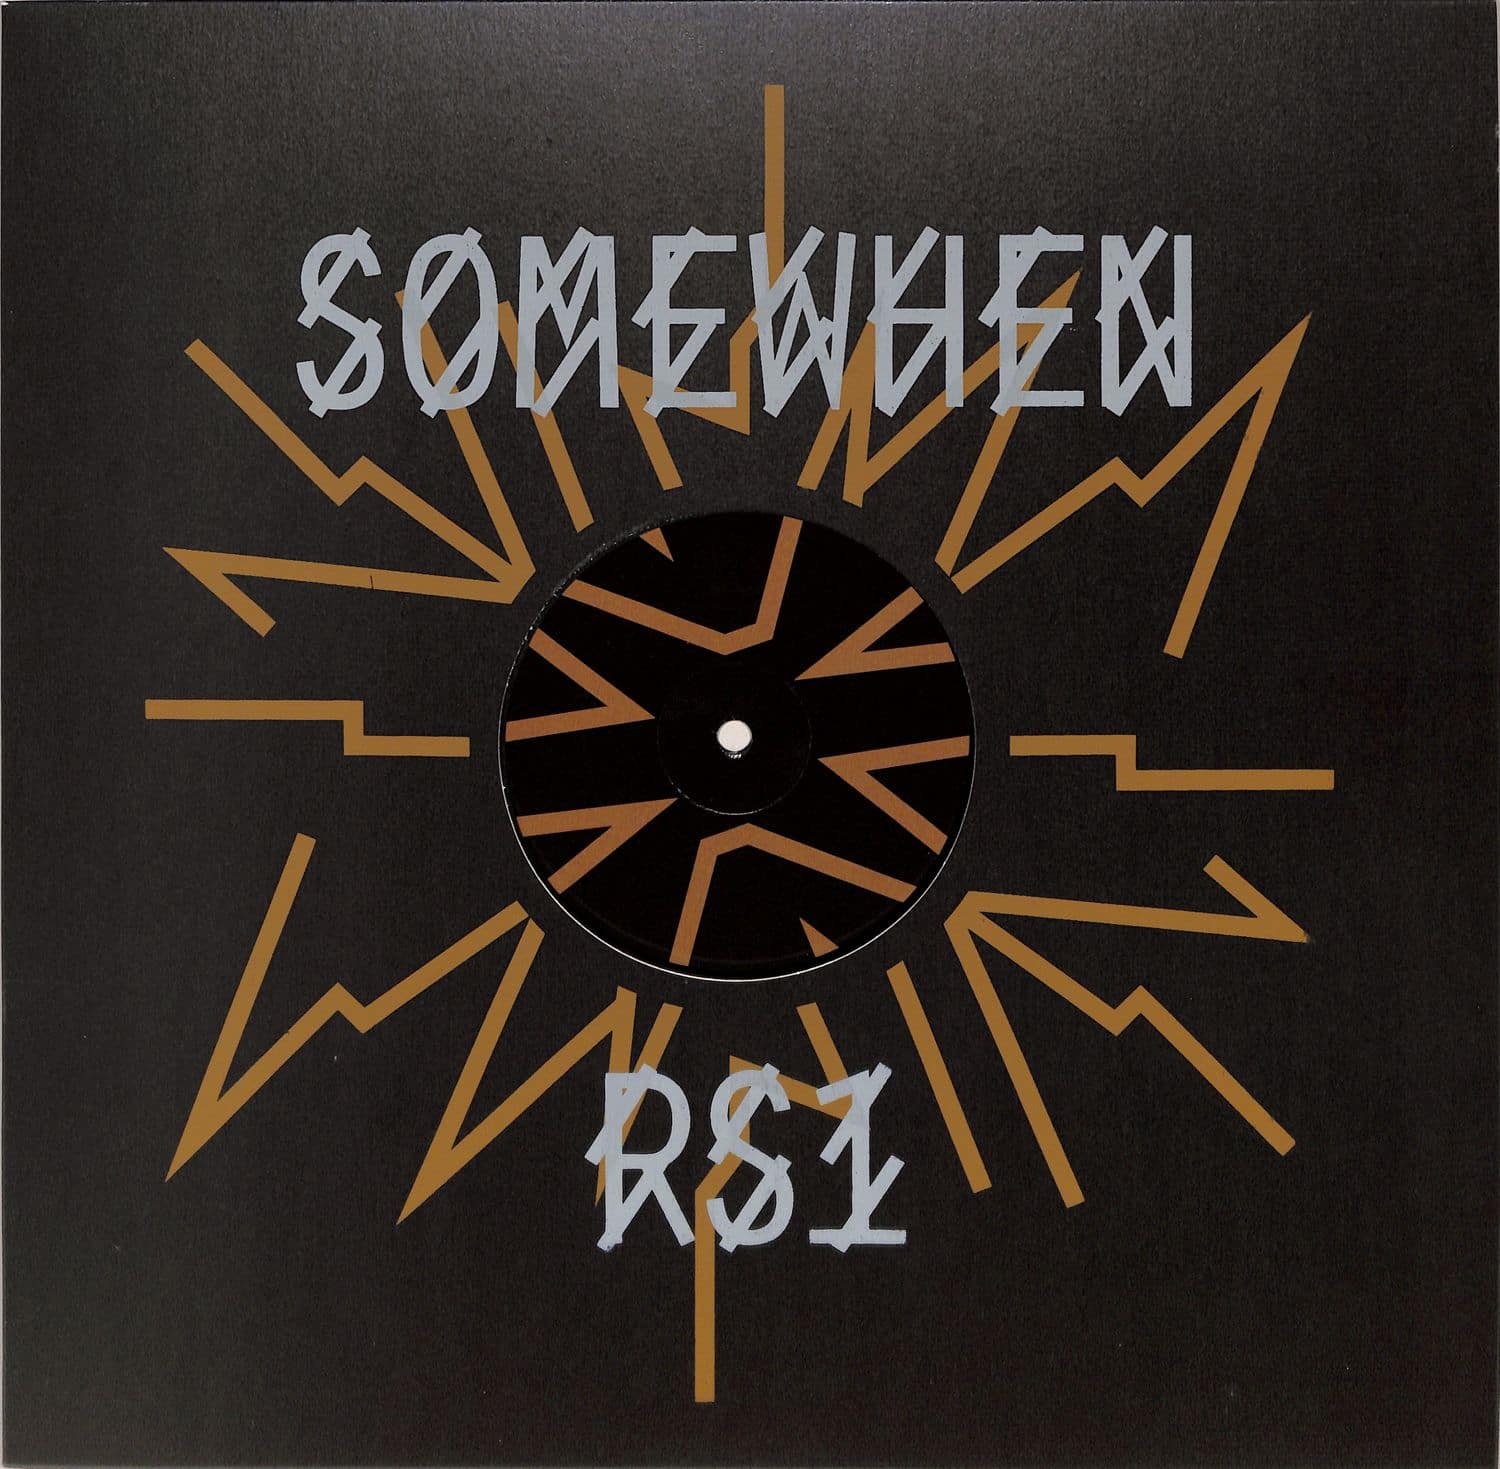 Somewhen - RS1